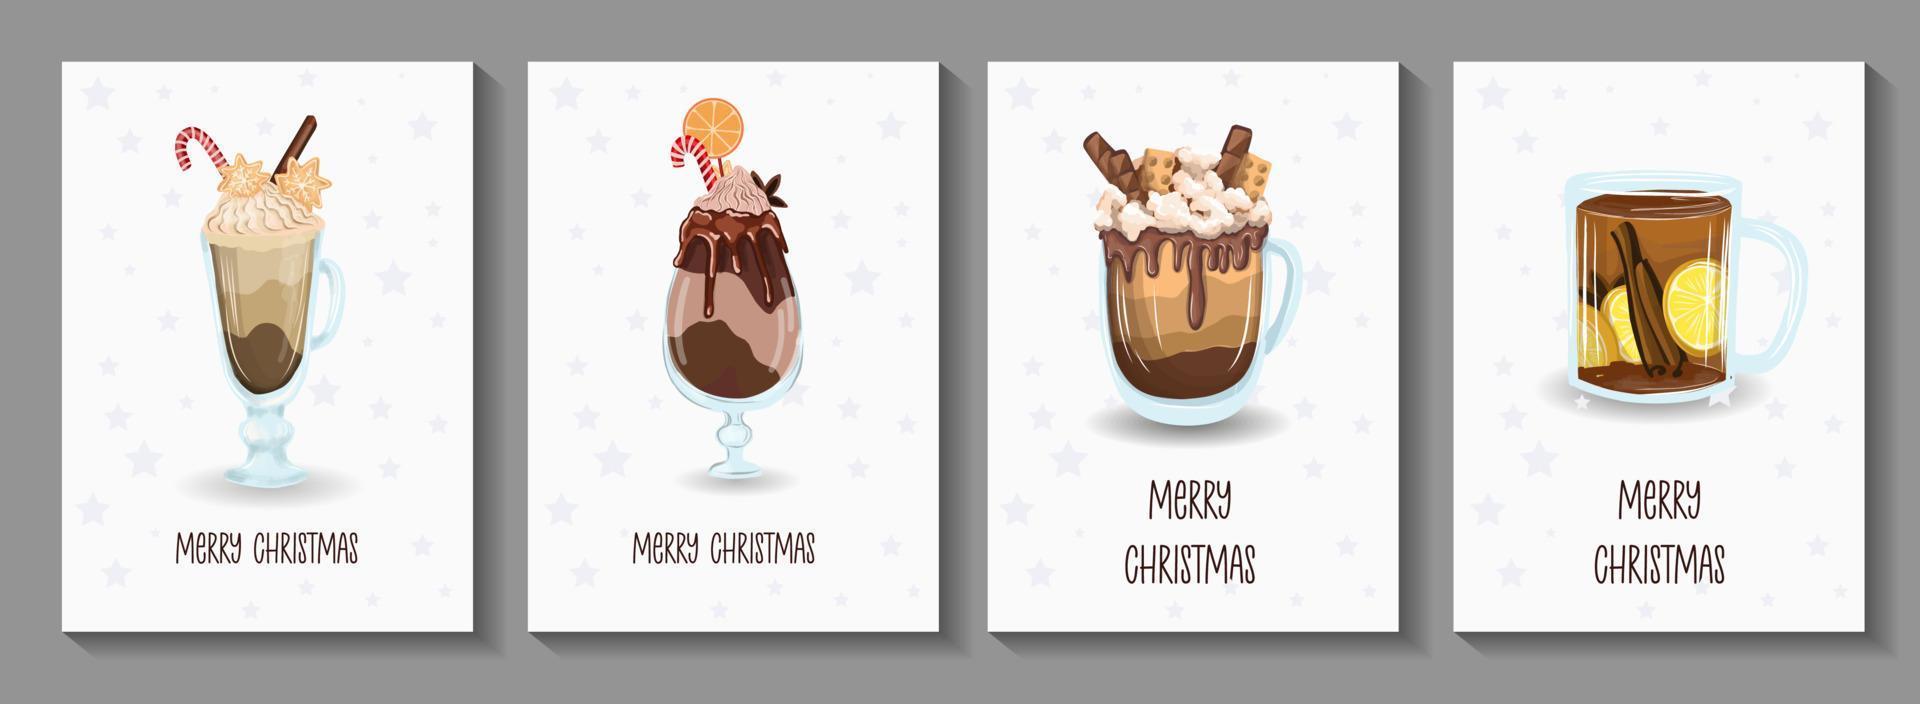 christmas card set with cute winter mugs. Drawn mugs with cocoa and hot chocolate, decorated with cinnamon sticks, cream and Christmas caramel. Cozy winter illustration in vintage style. Hygge style. vector